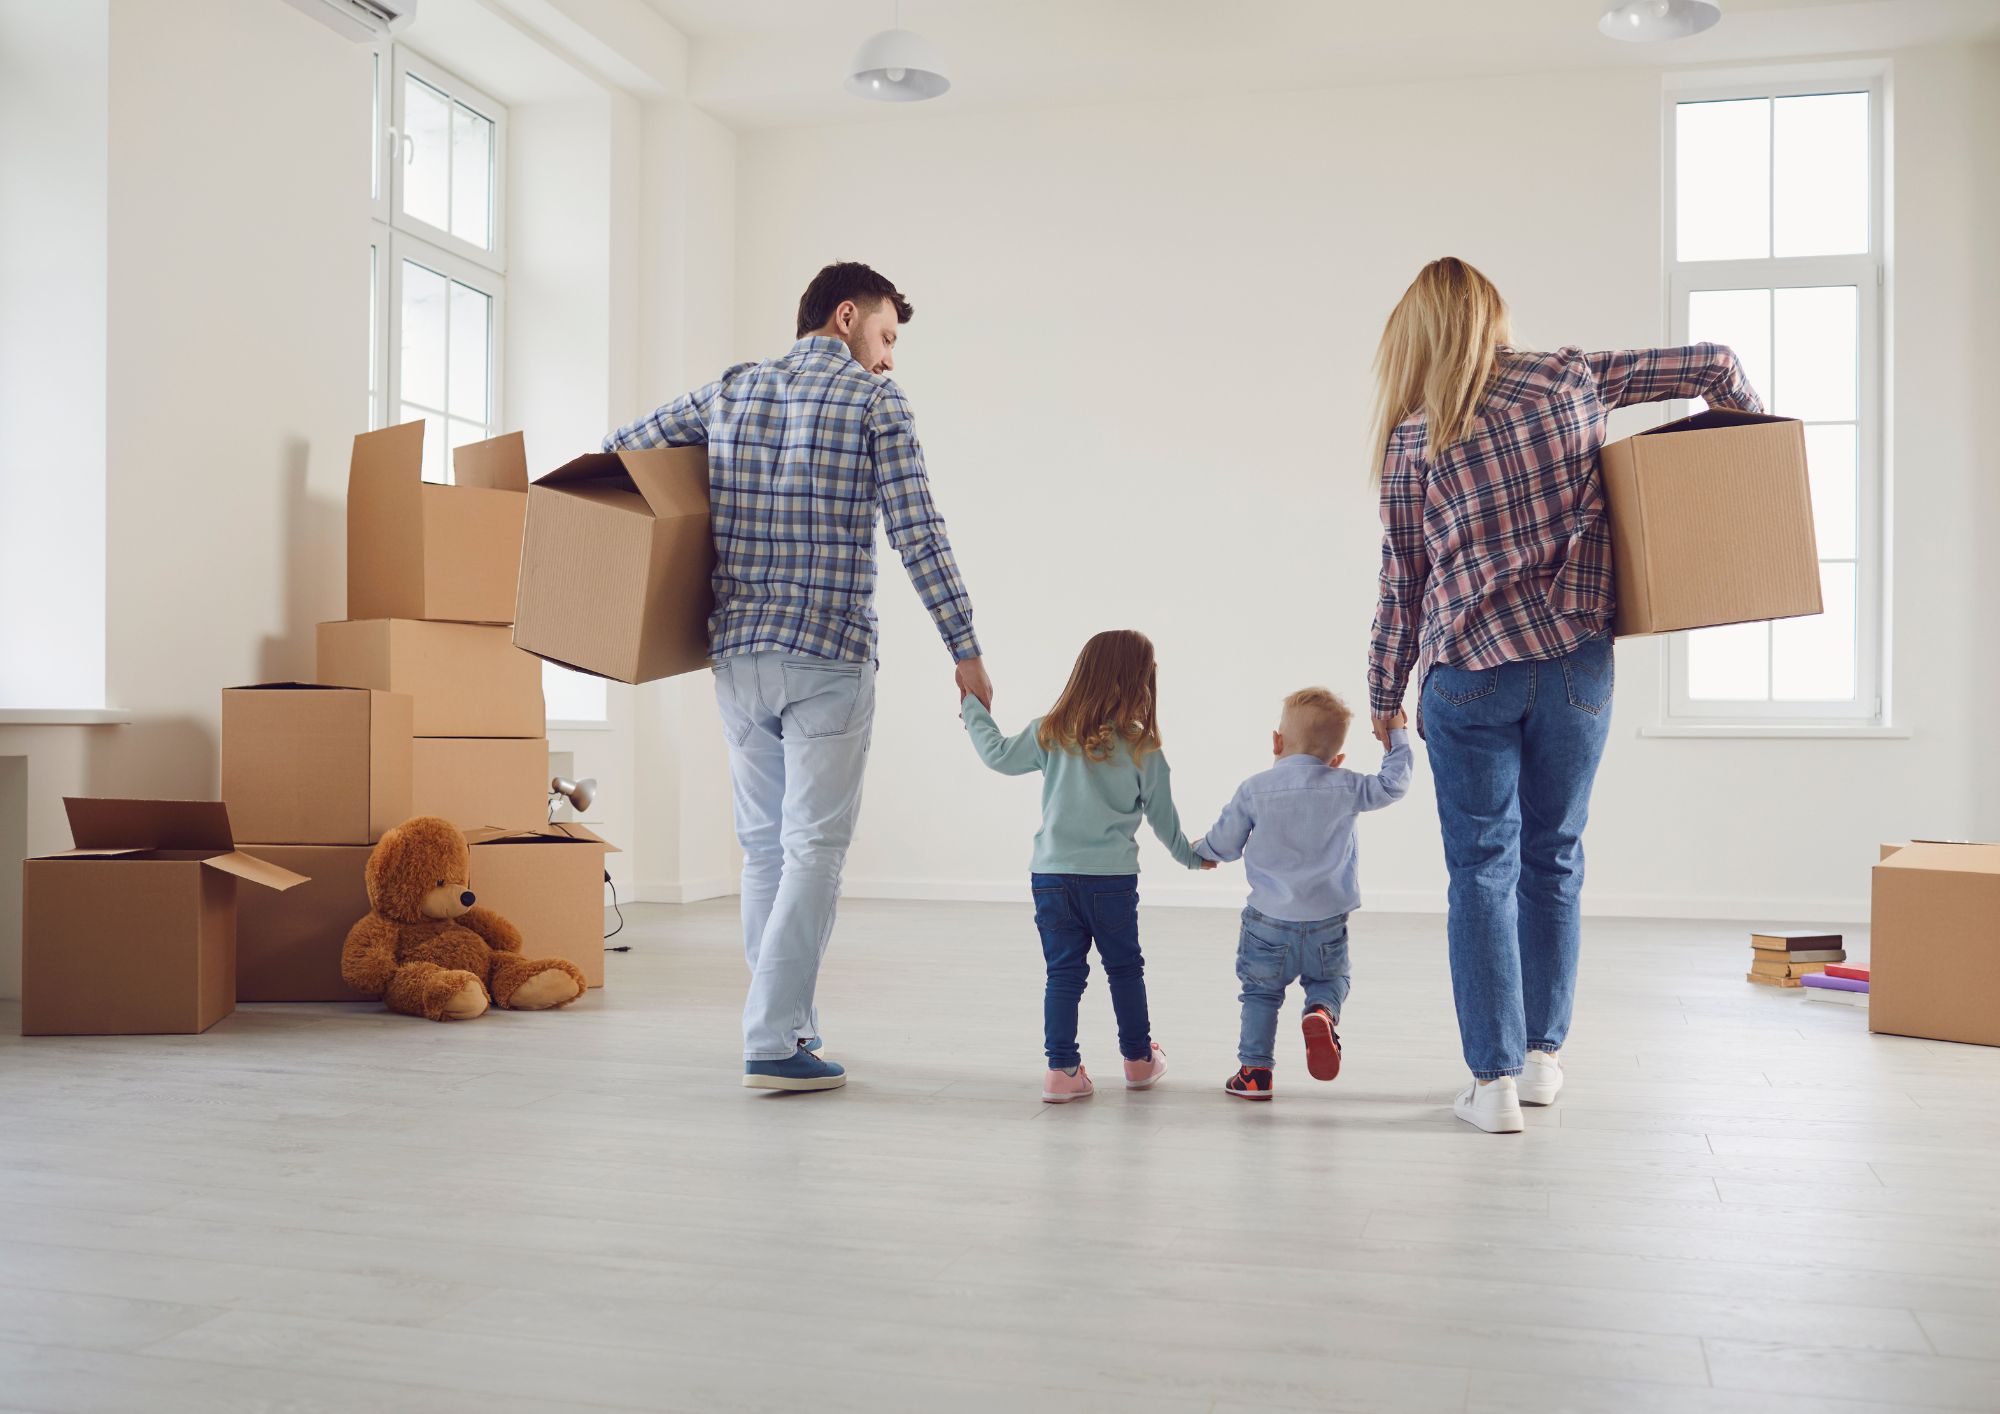 Stock Image of a family moving into a house - Start your property journey on Share to Buy!